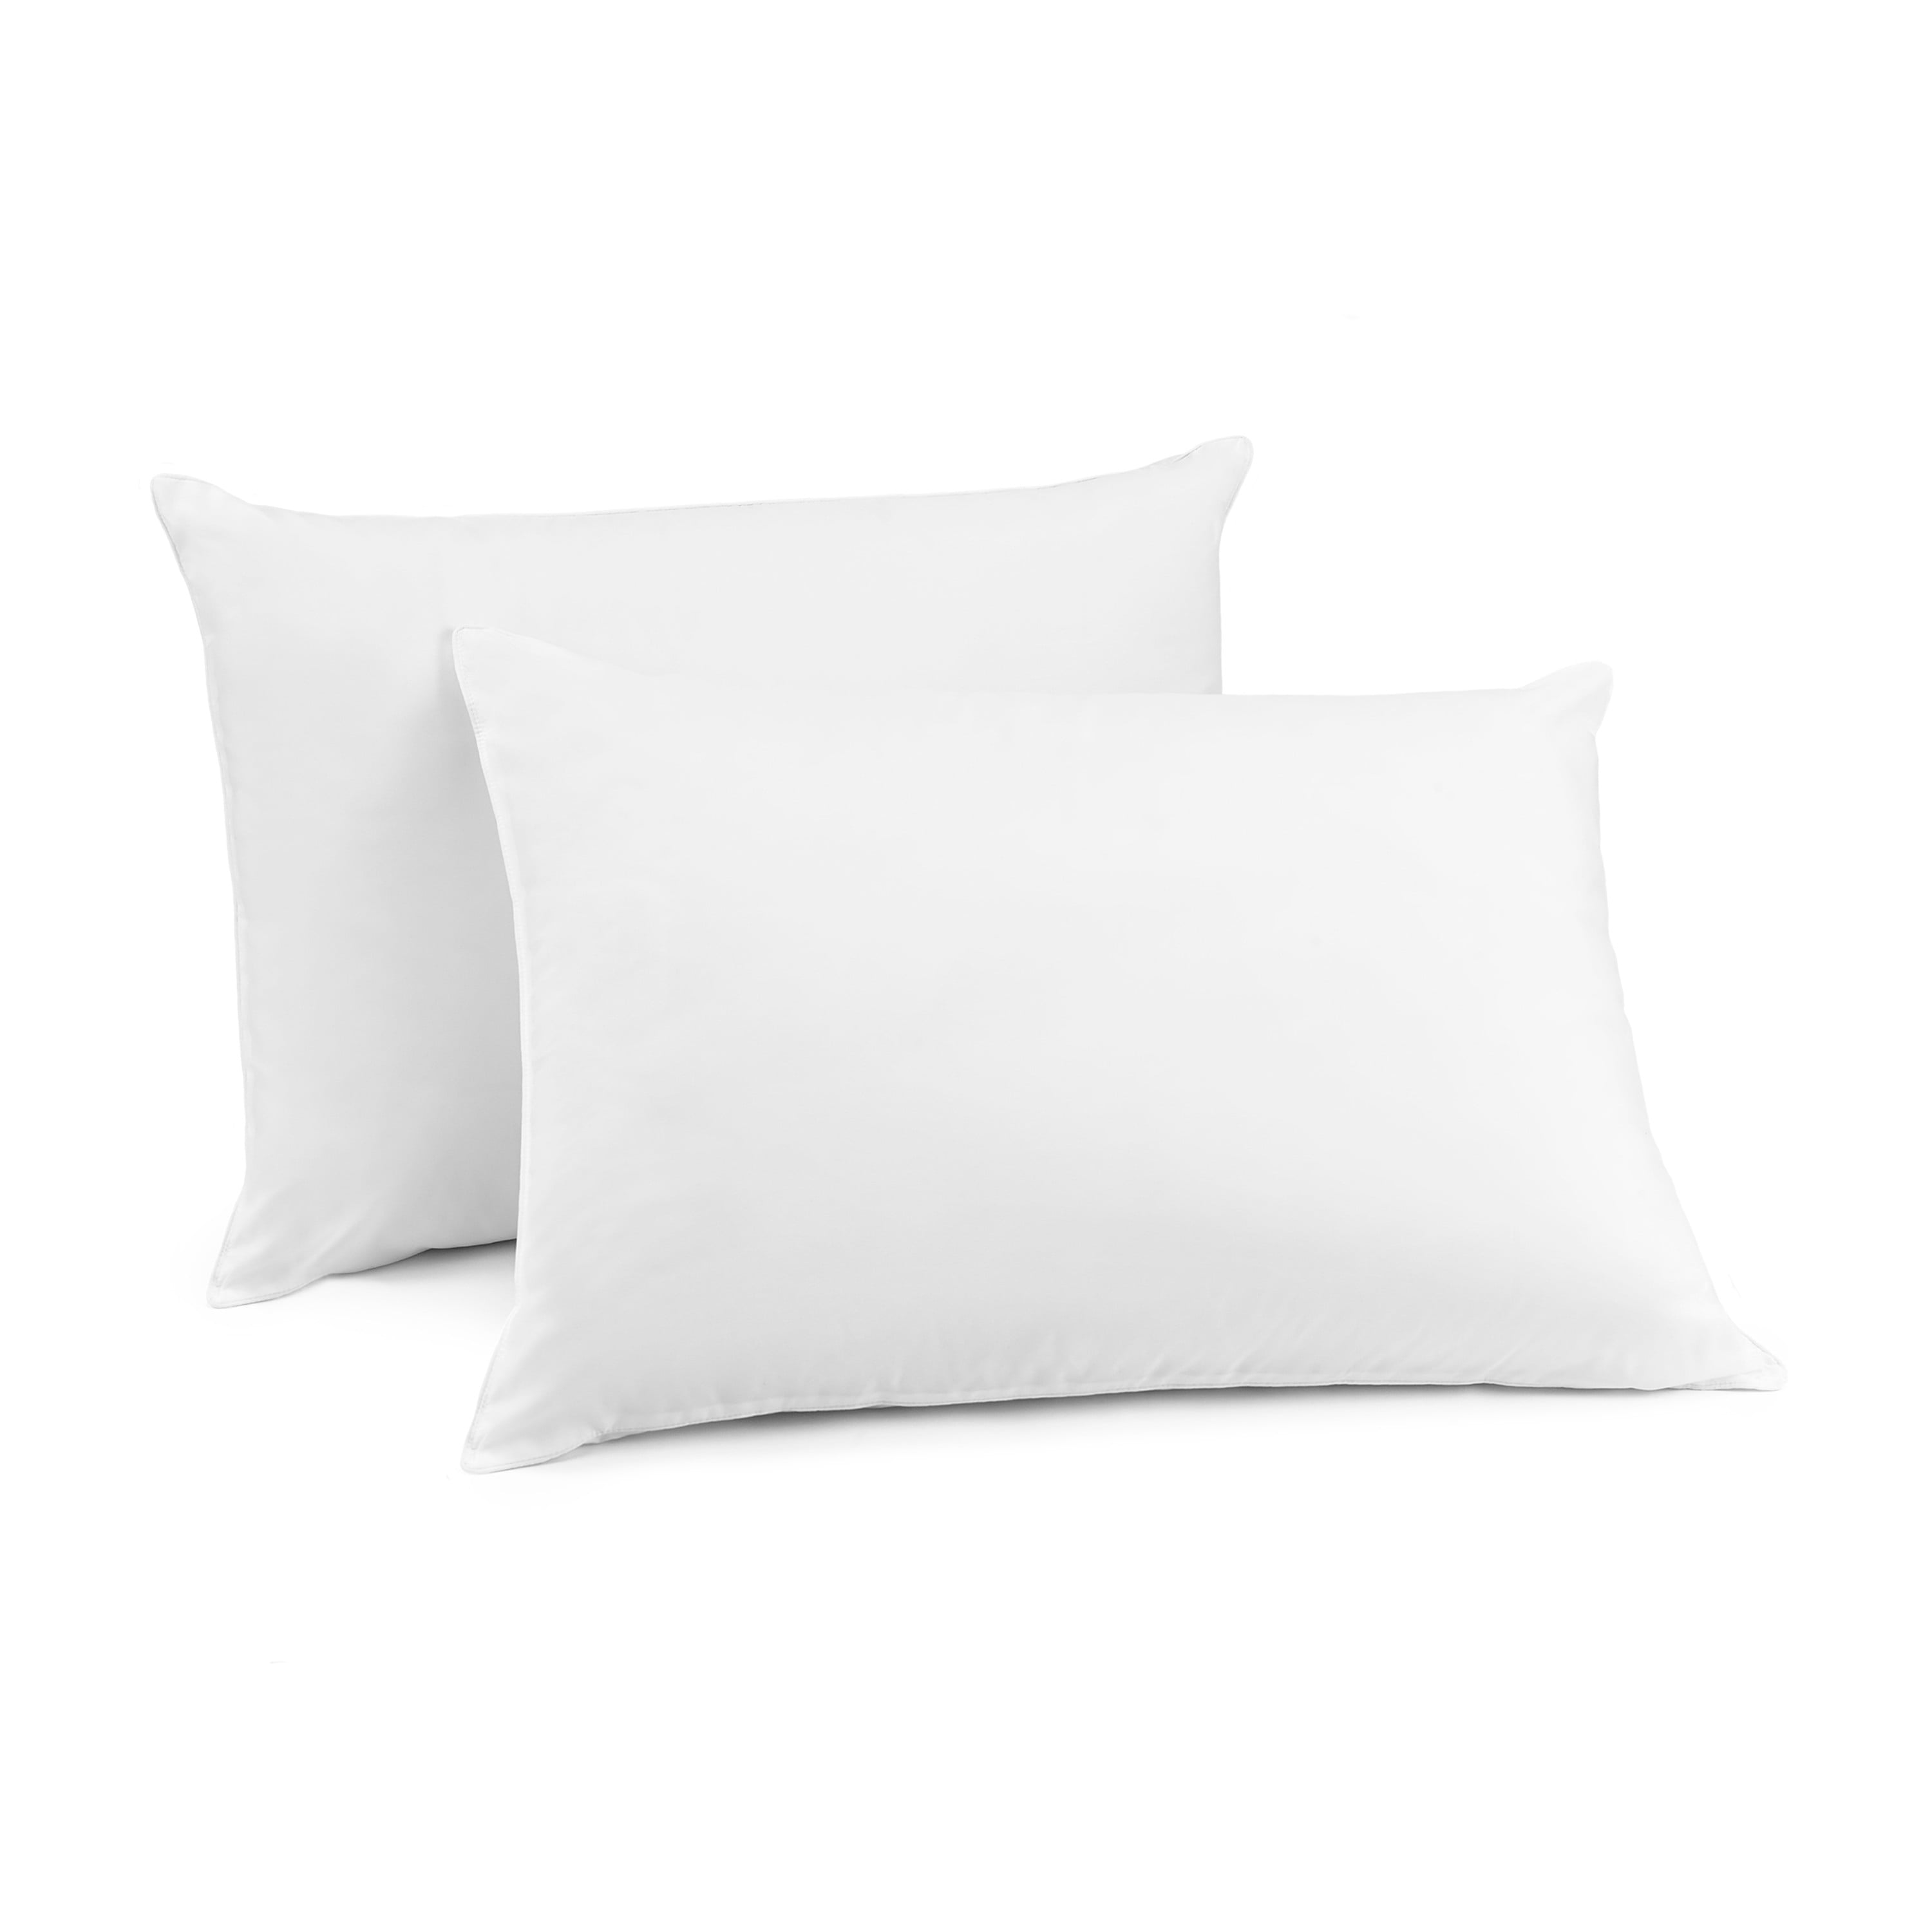 Anti-Allergy Polyester Filled Pillows Anti-Dustmite 2 Amazing Value Twin Pack 